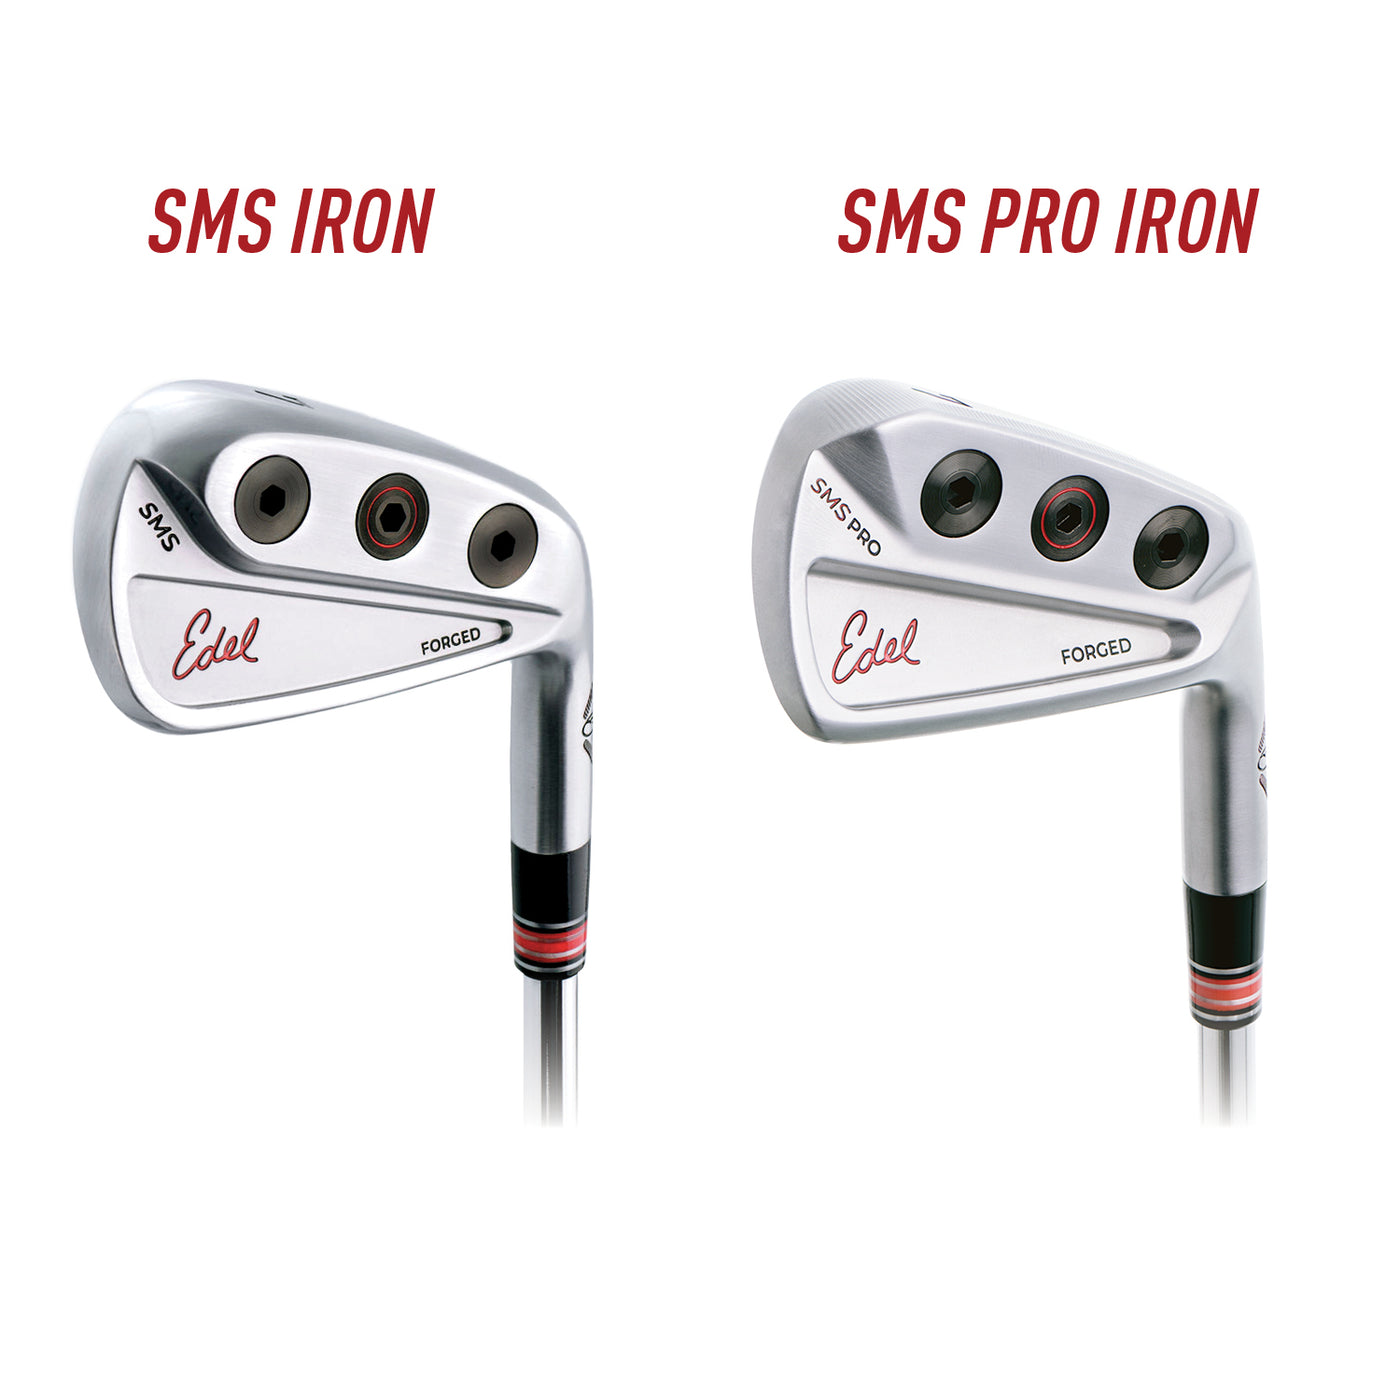 SMS vs. SMS Pro Irons